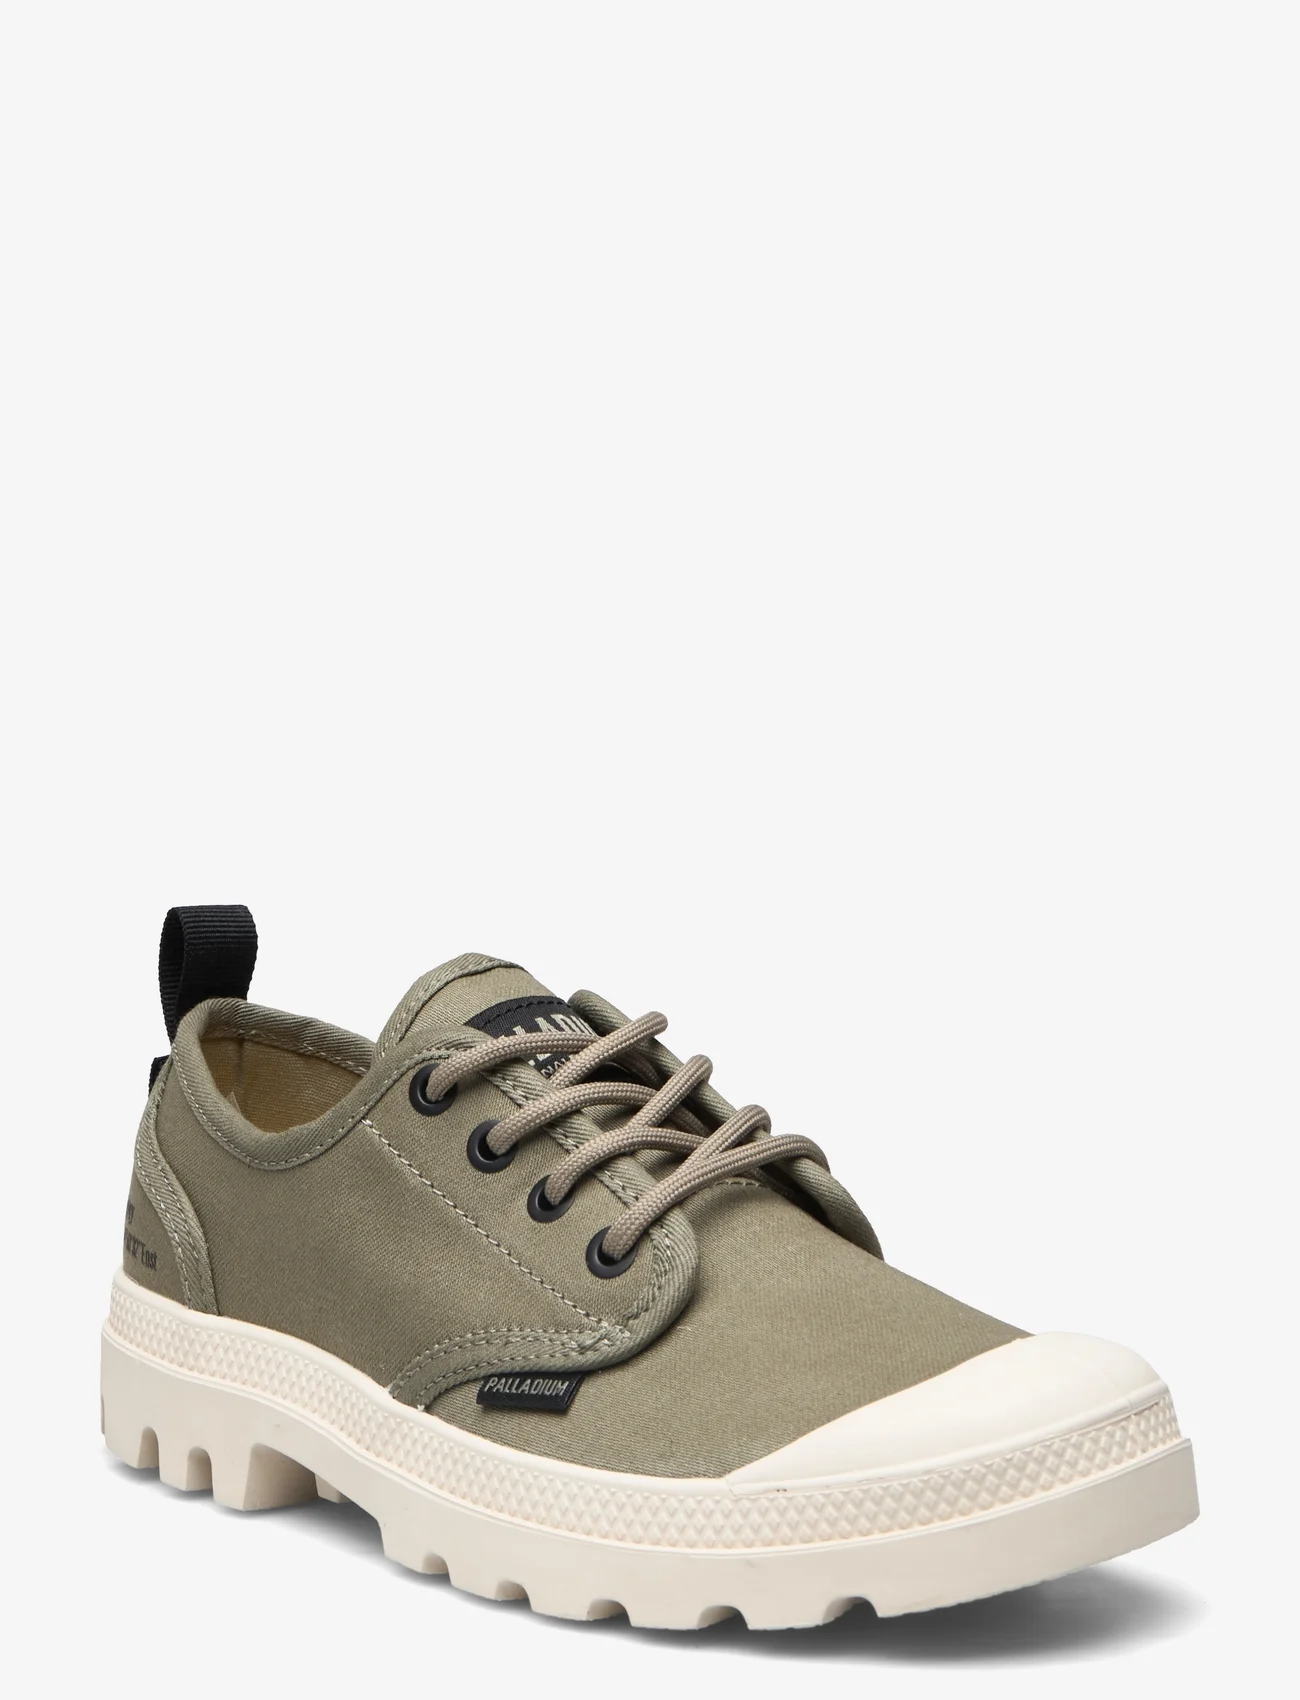 Palladium - Pampa Ox HTG Supply - low top sneakers - vetiver - 0